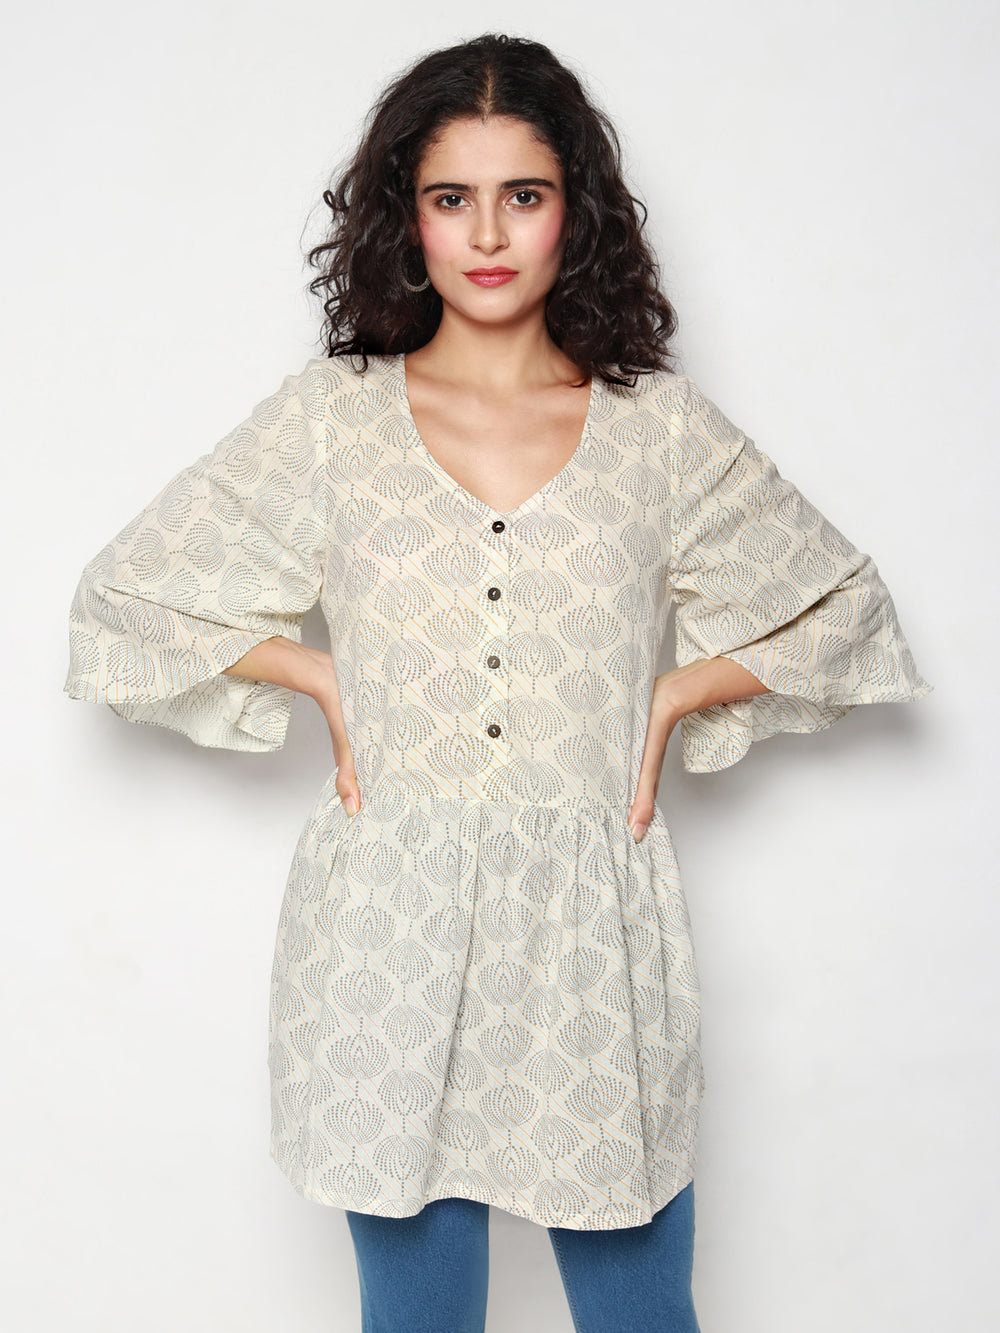 Ivory Cotton Tunic with Beige & Grey Print